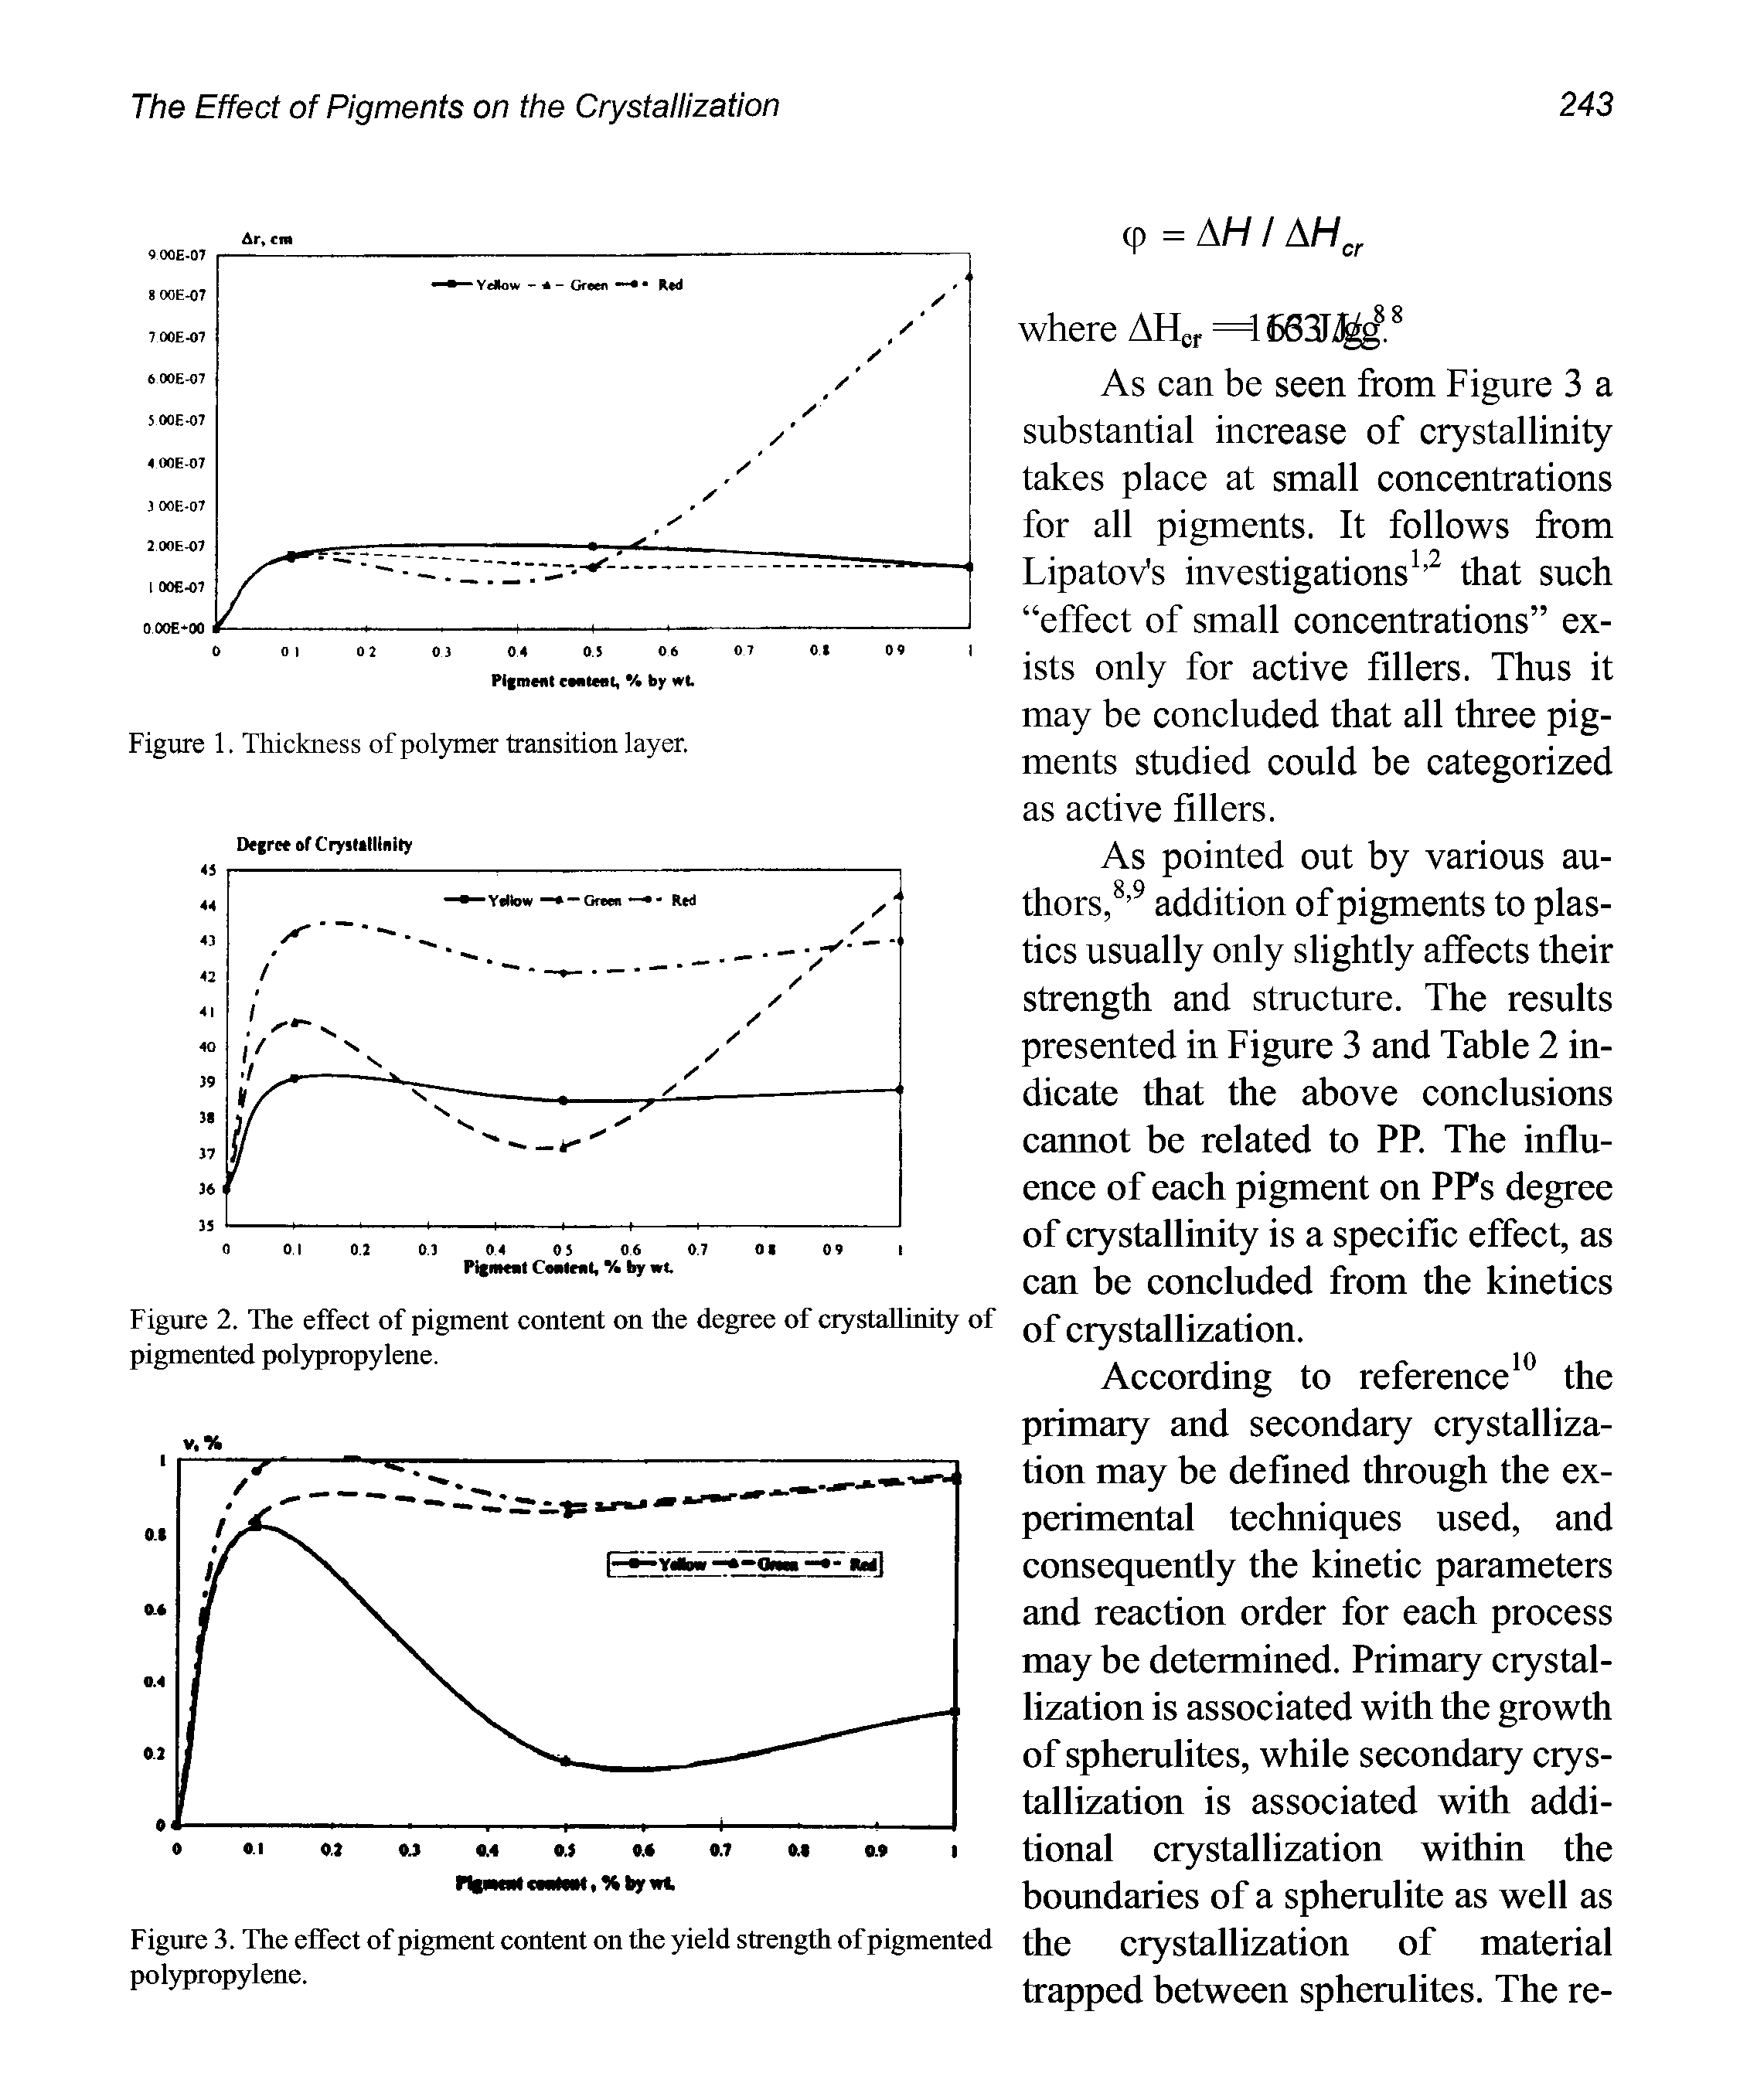 Figure 2. The effect of pigment content on the degree of crystallinity of pigmented polypropylene.